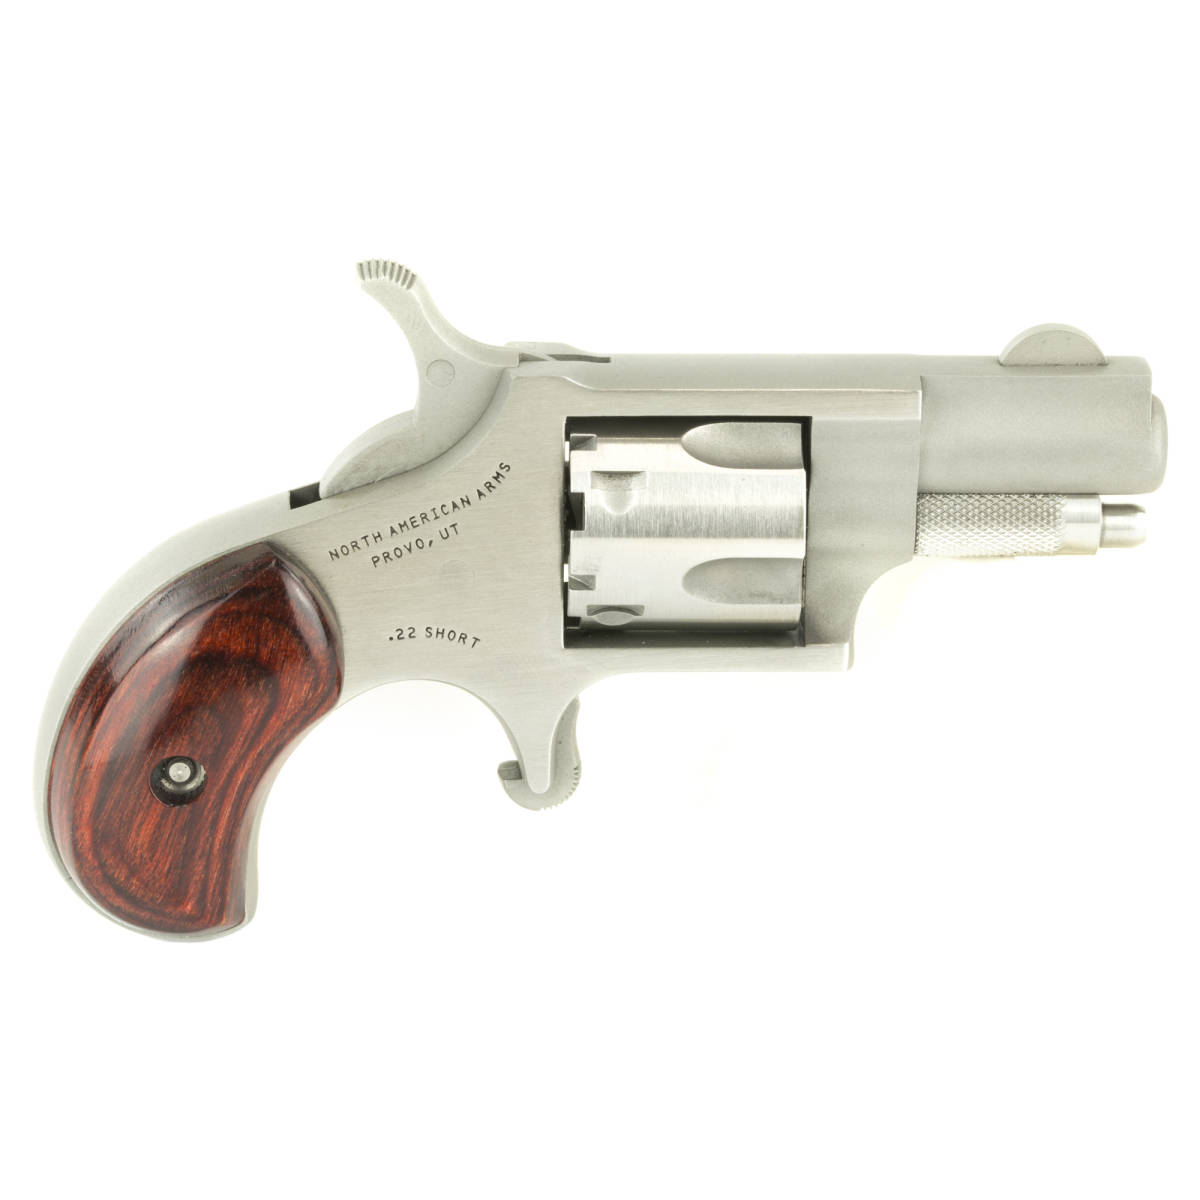 North American Arms 22S Mini-Revolver 22 Short Caliber with 1.13”...-img-1